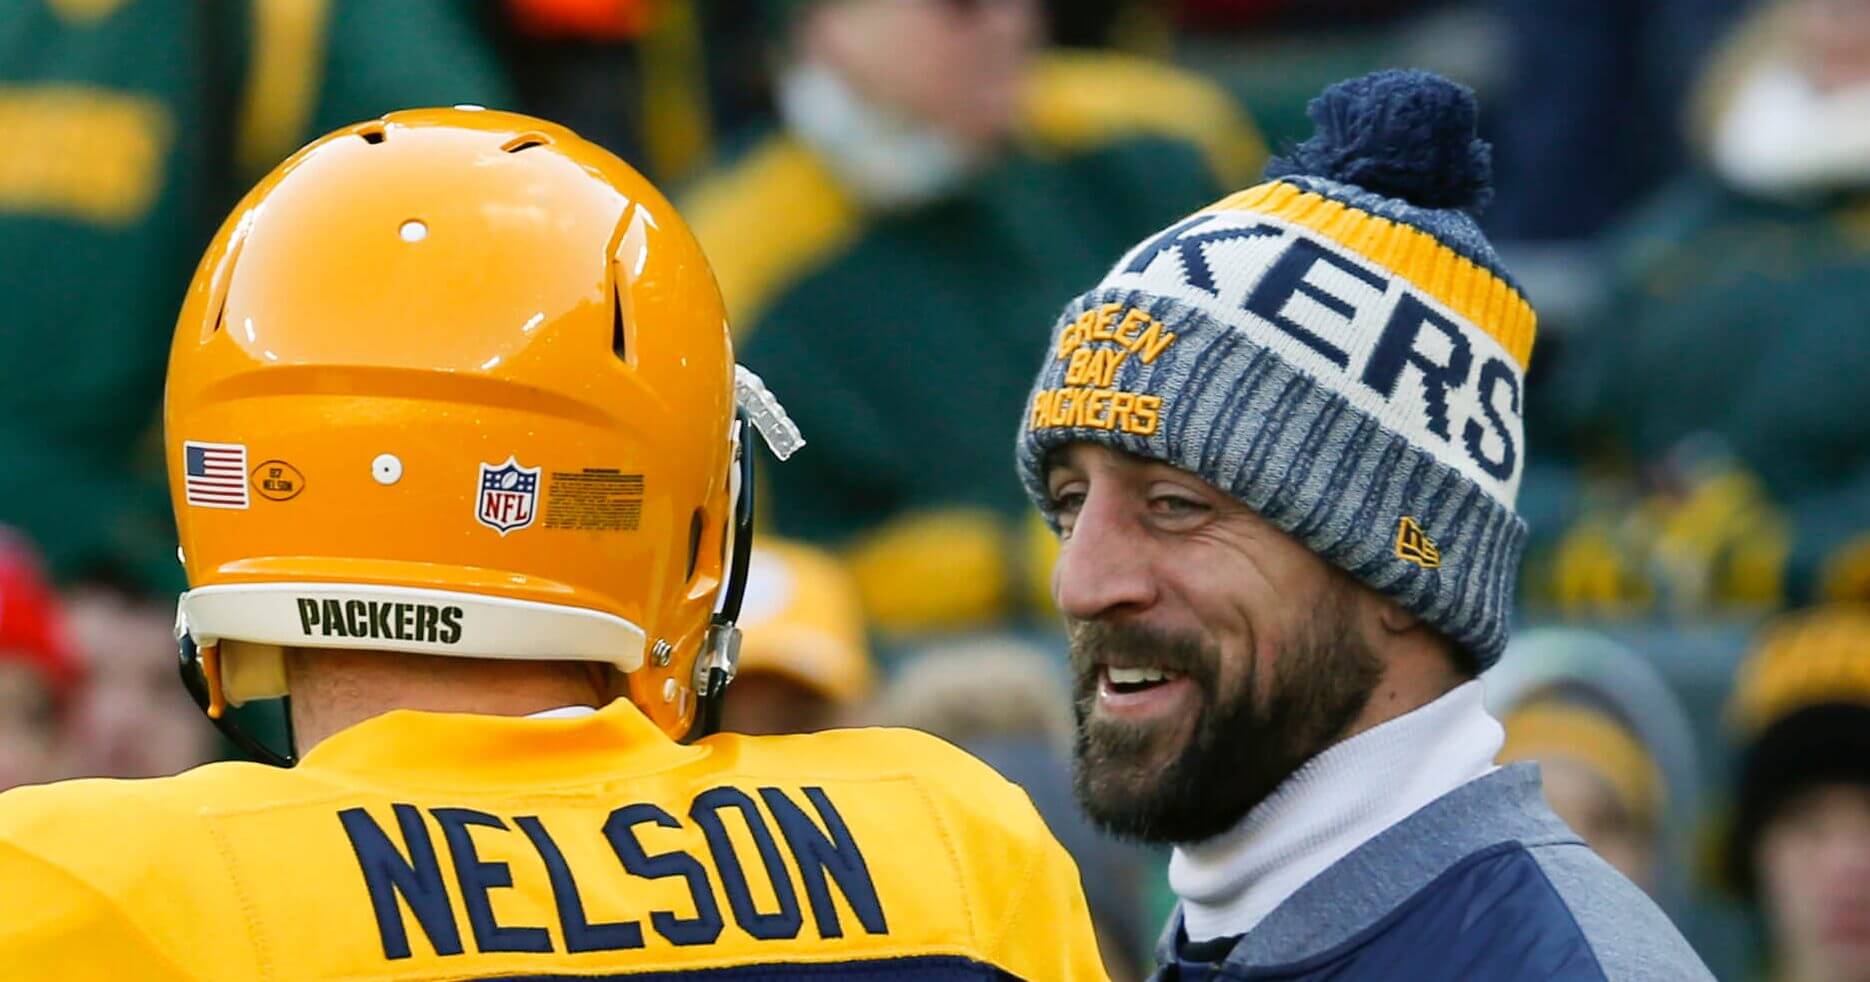 In this Nov. 19, 2017, file photo, Green Bay Packers quarterback Aaron Rodgers talks to Jordy Nelson before a game in Green Bay, Wisconsin. Nelson's departure has left Rodgers in need of a new partner to take part in one of his pregame routines. In the end zone before a game would be Rodgers and Nelson playing catch and spinning footballs on their fingertips. That won't happen Friday night now that Nelson is a Raider, though they remain good friends.